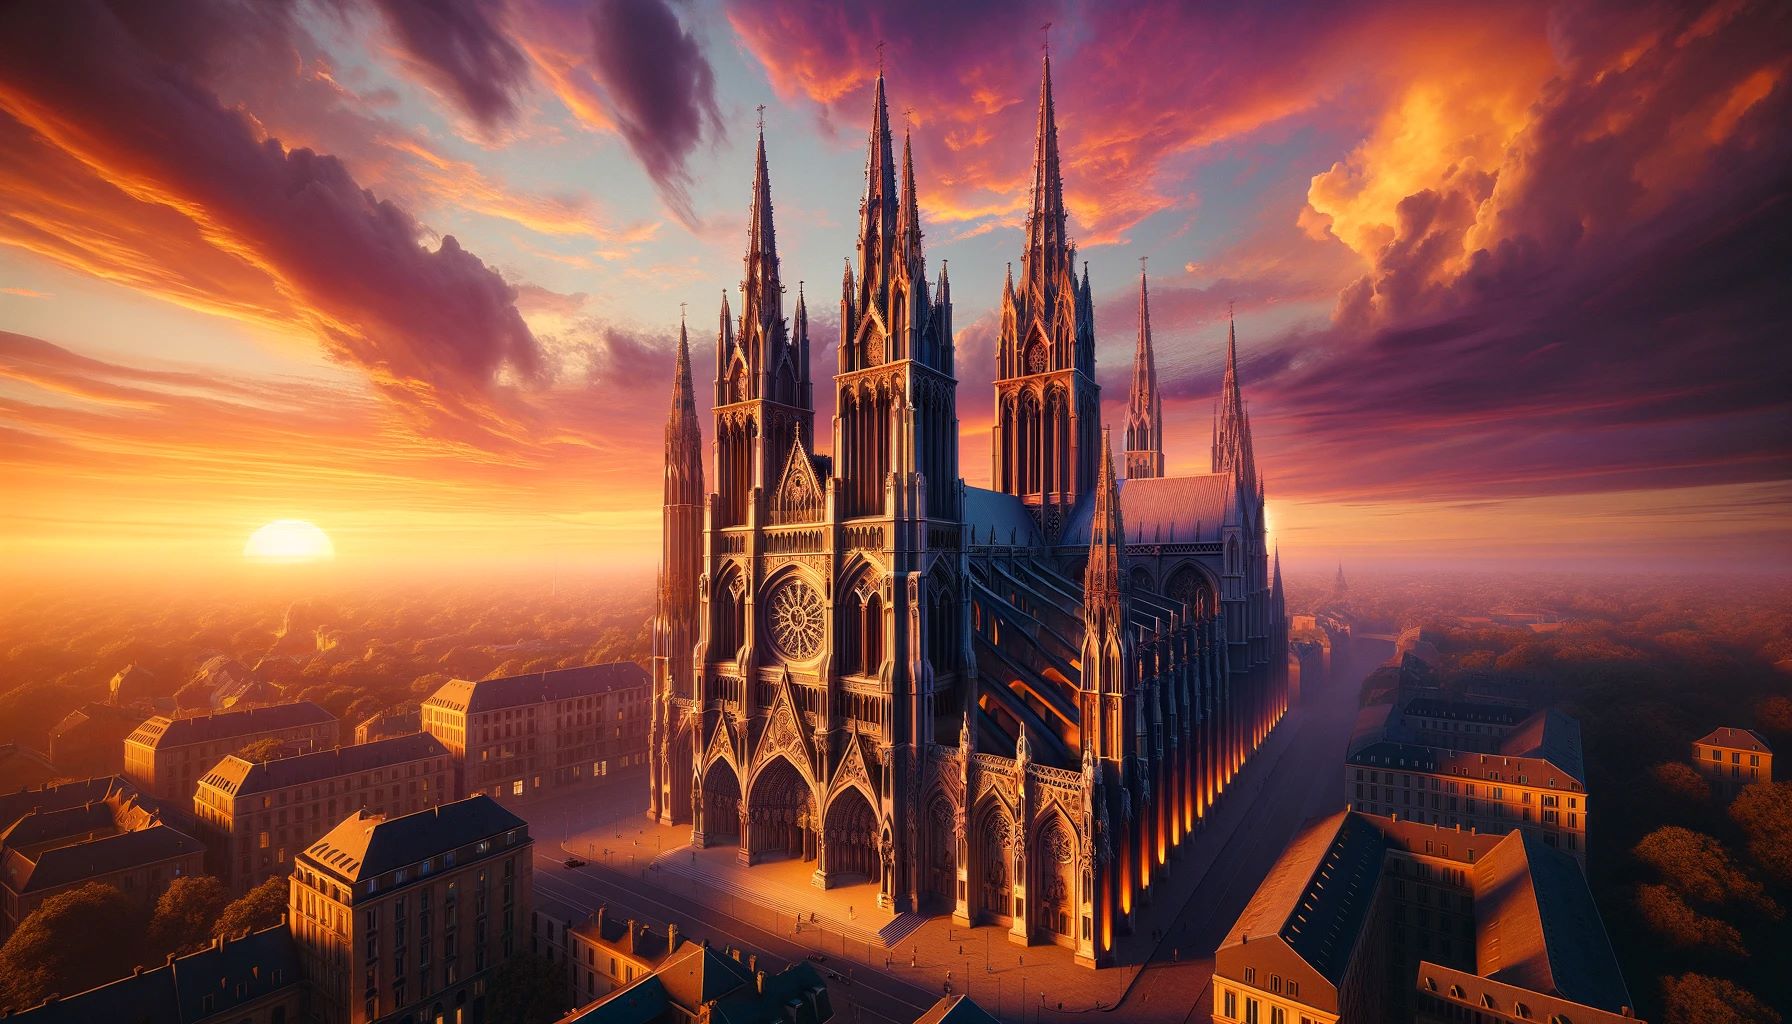 What Is The Largest Gothic Cathedral In The World